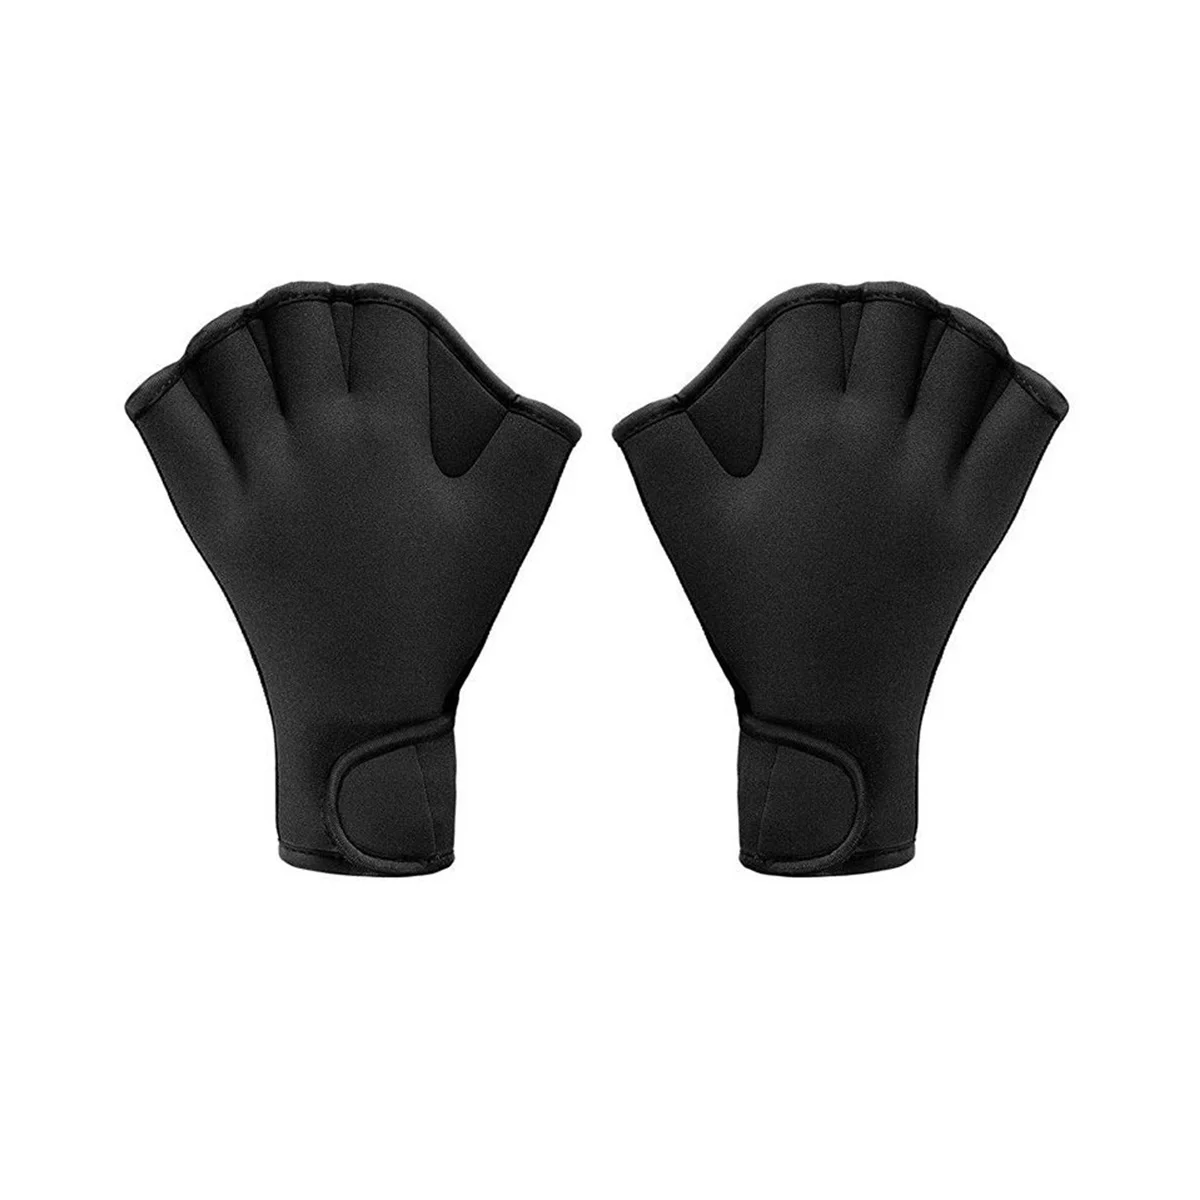 

Swimming Training, Diving Equipment, Anti- Semi-Fingered Gloves for Adults and Children Swimming Training,Black+L